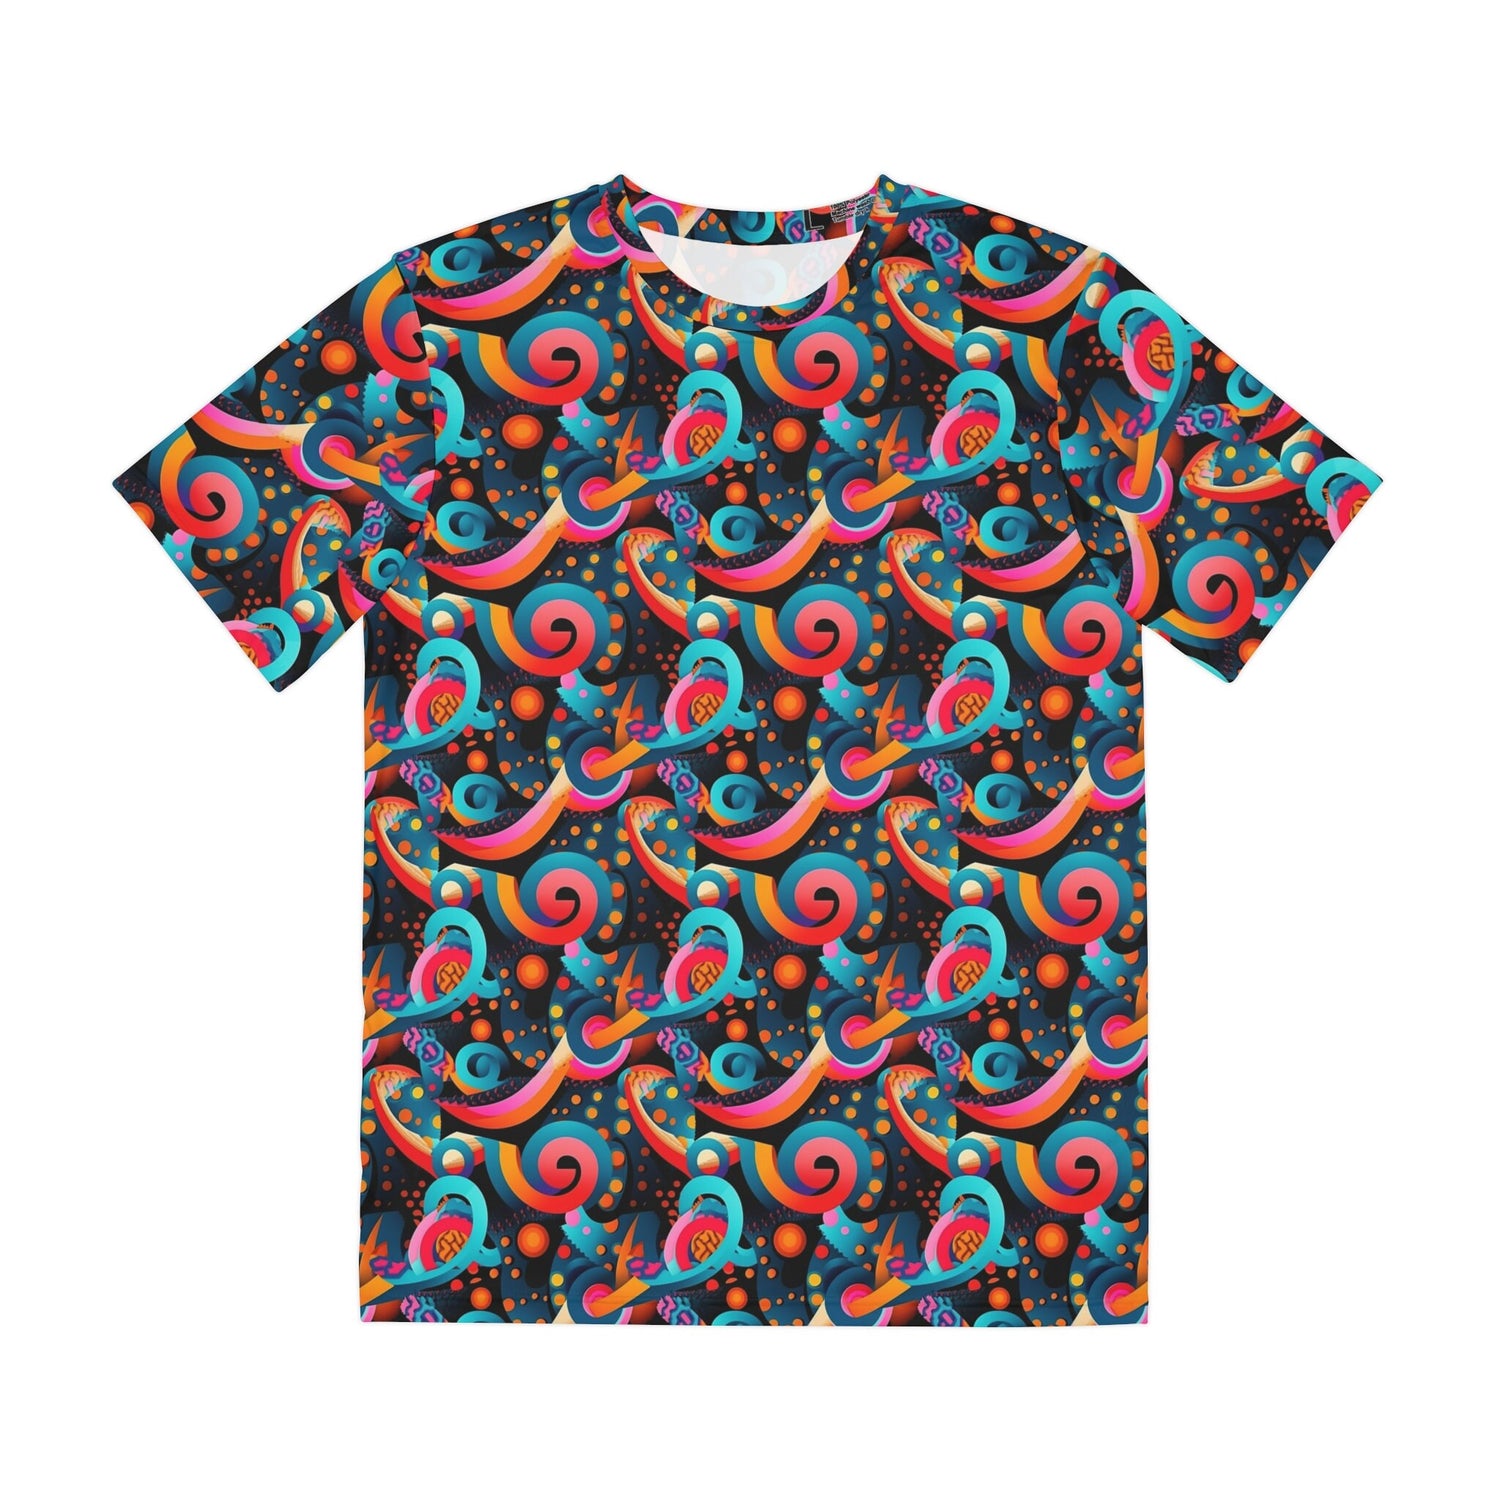 Sublimated T Shirt for Festivals, Raves, Events | Psyched | Men's Streetwear, Heady, Trippy T-Shirt, Sublimated T-Shirt, Rave Wear